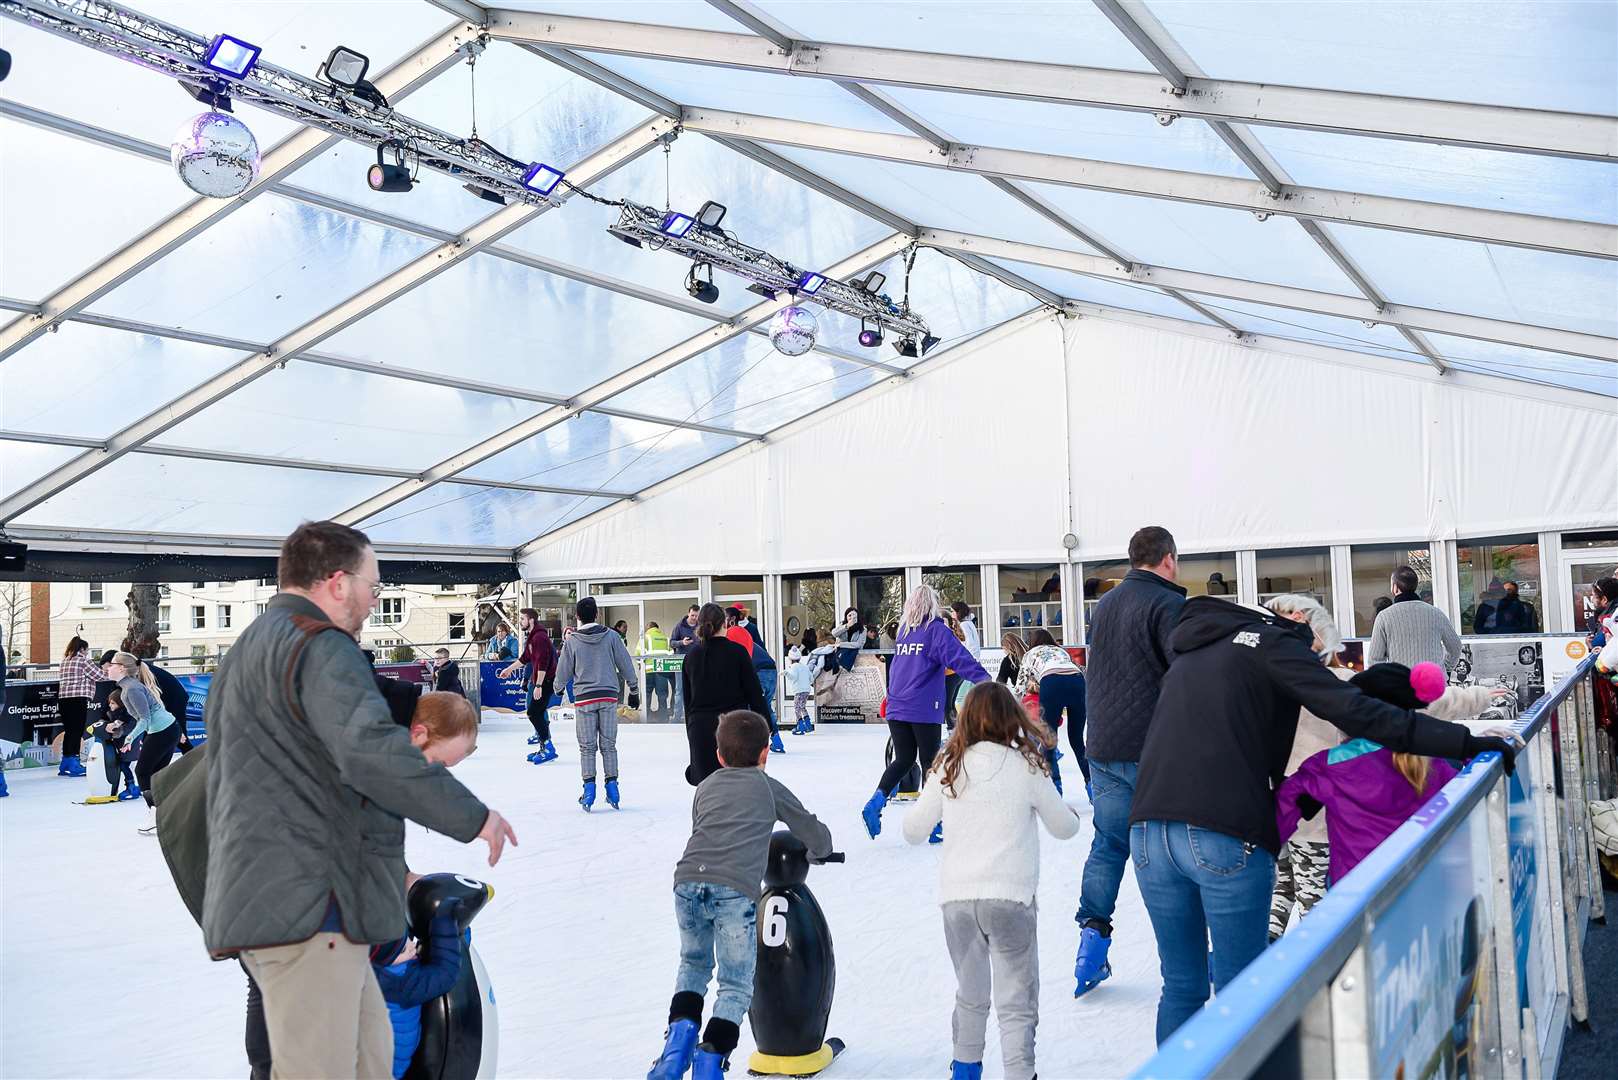 The ice rink which is usually set up in Dane John Gardens has been cancelled this year